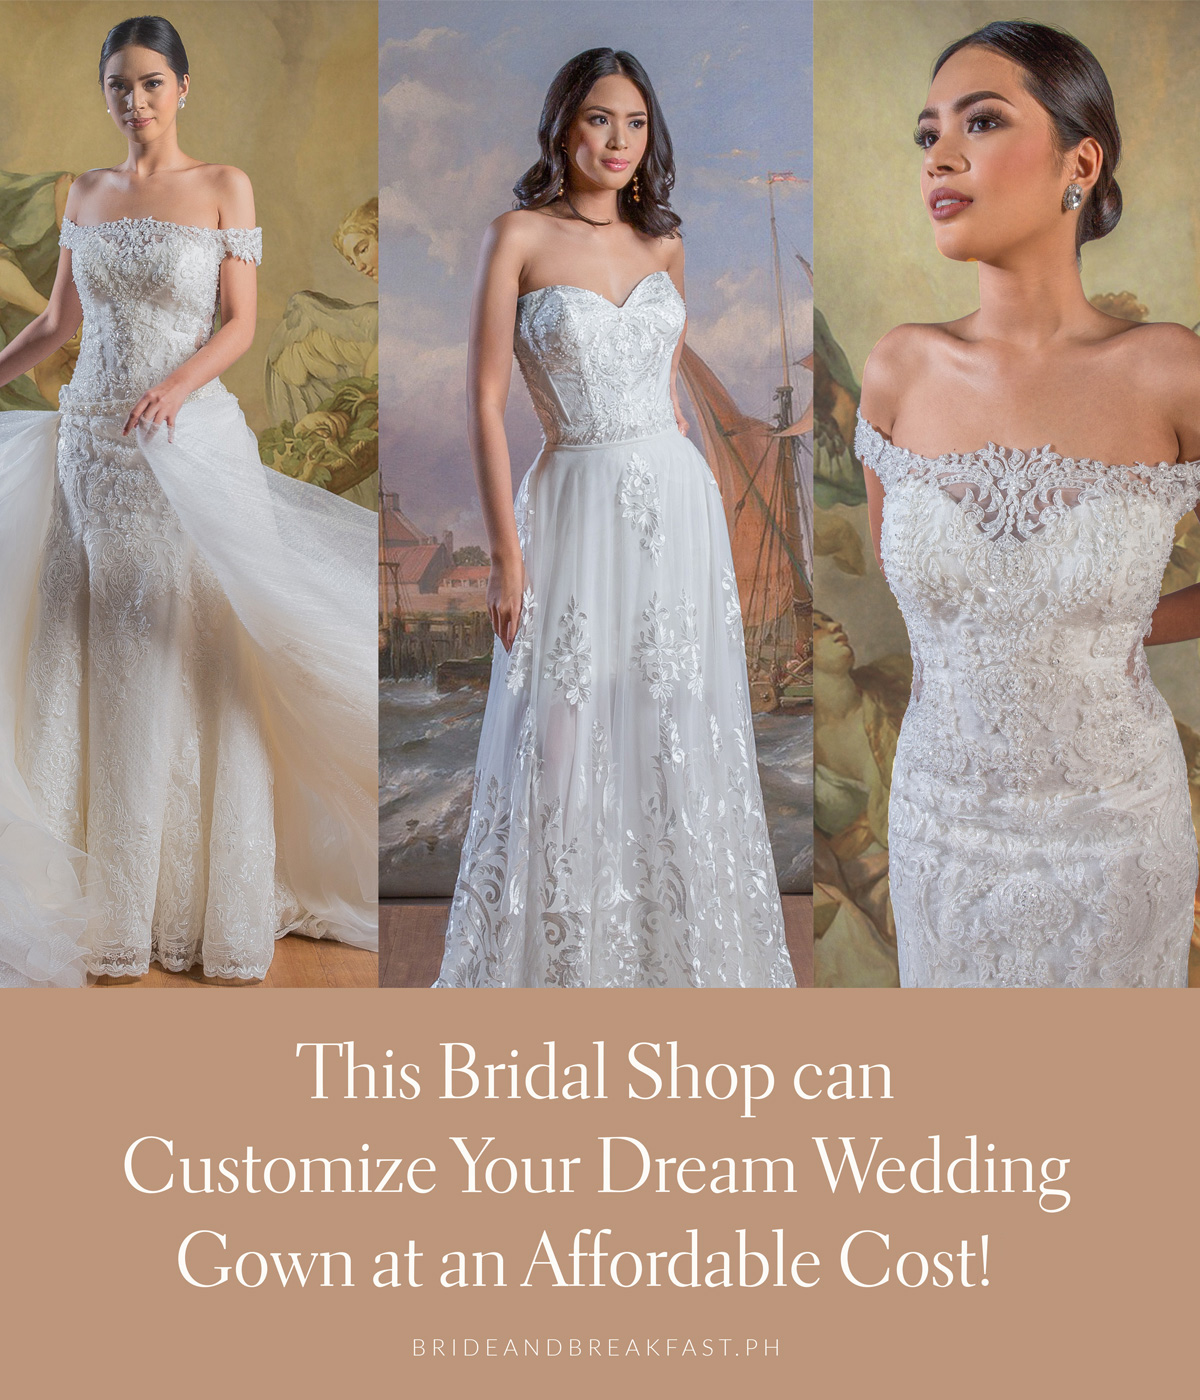 This Bridal Shop can Customize Your Dream Wedding Gown at an Affordable Cost!